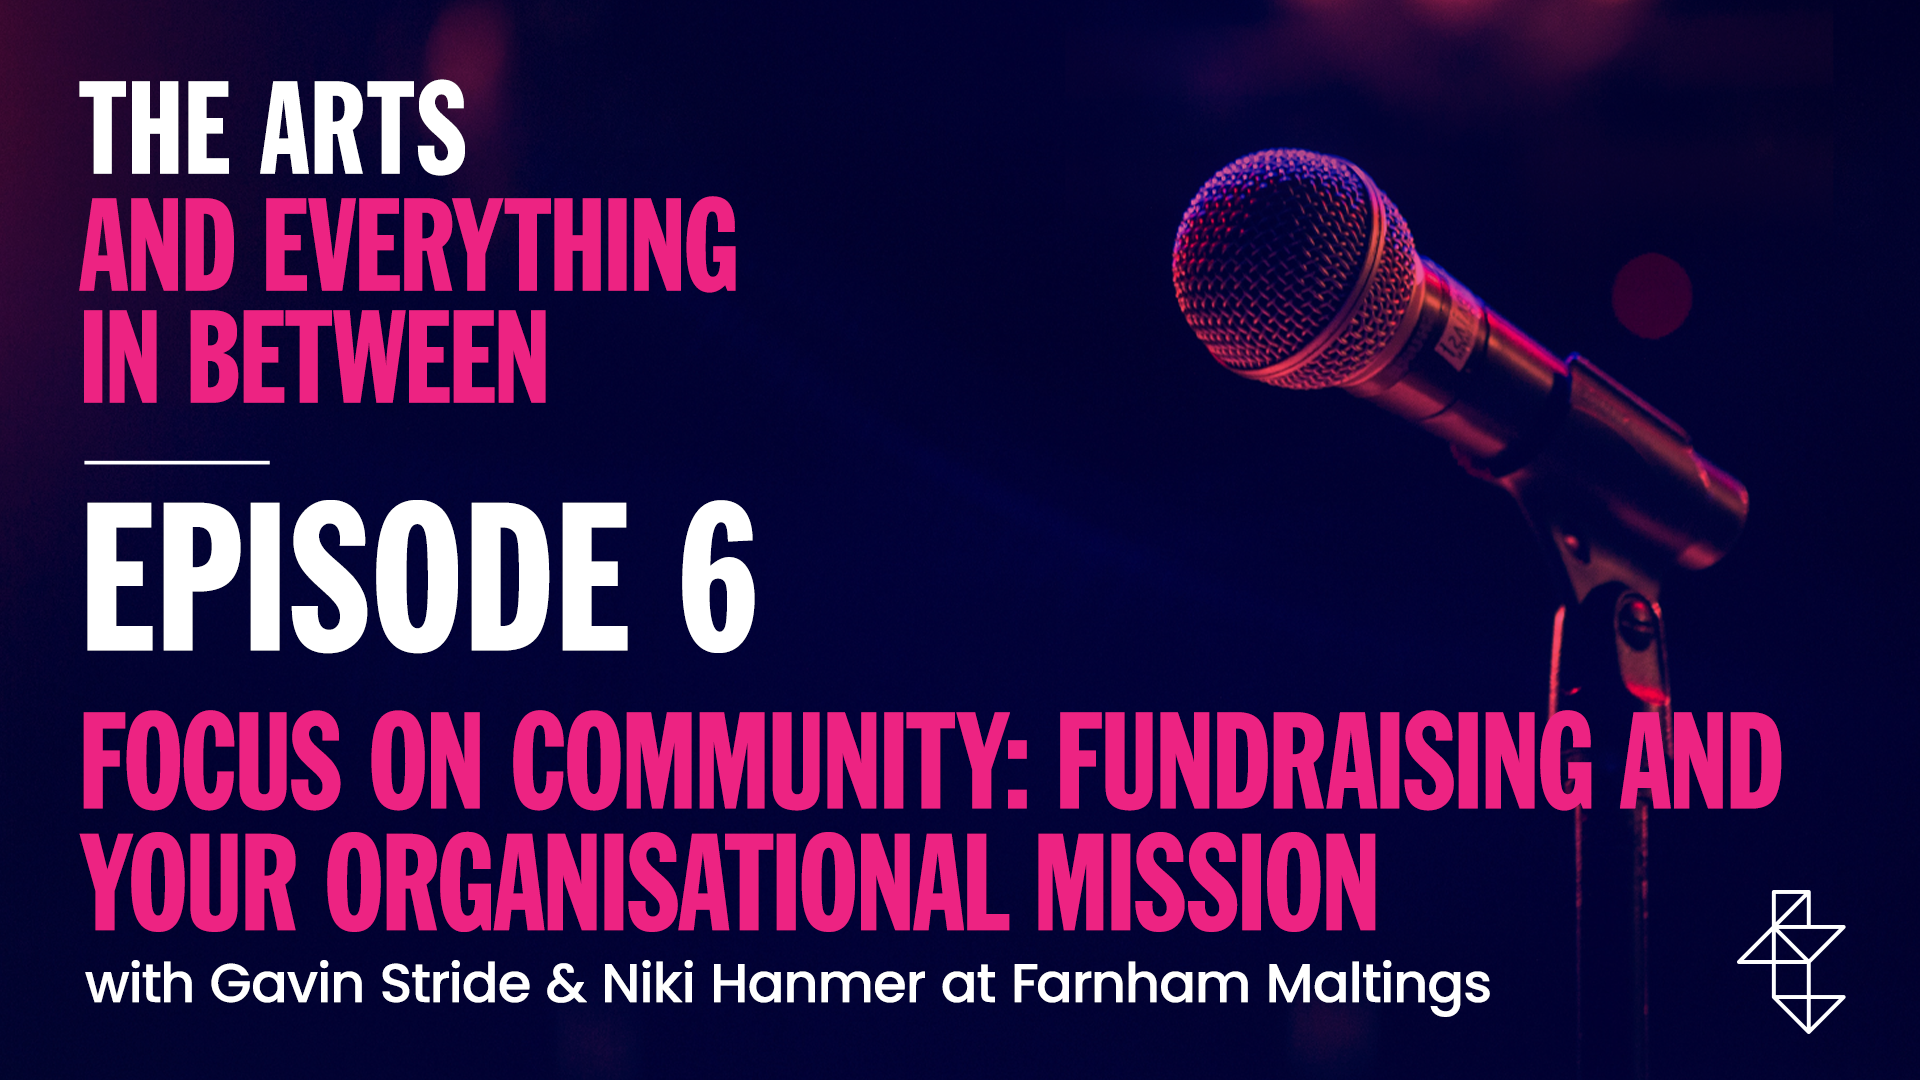 Focus on Community: Fundraising and Your Mission with Farnham Maltings